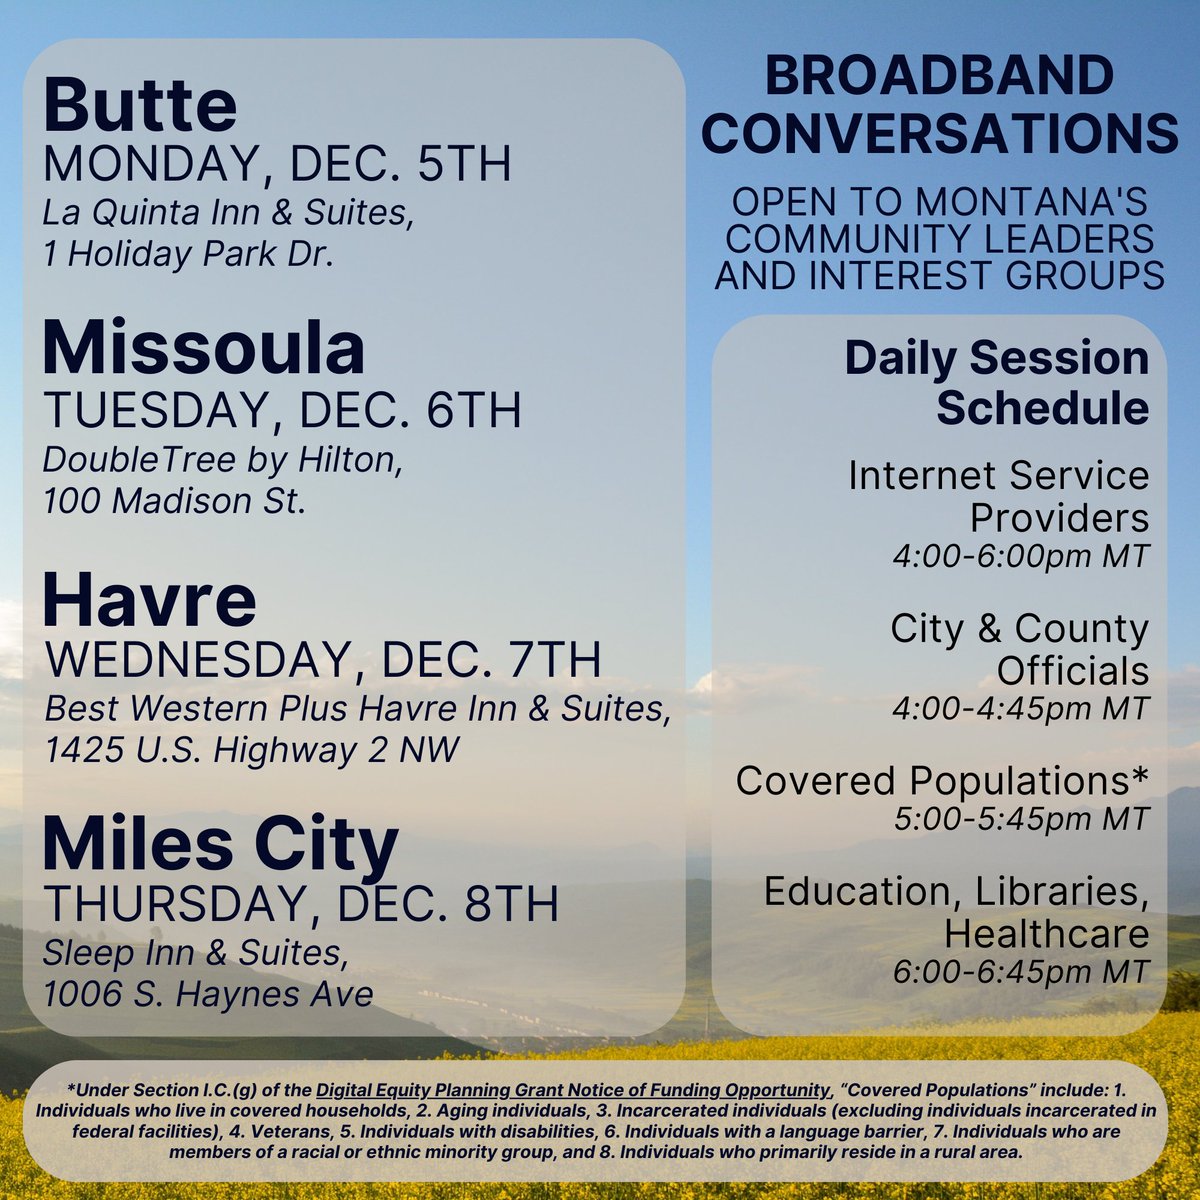 Nearly 24% of Montanans do not have an internet subscription of any kind – help Montana close the digital divide by sharing your experiences with broadband access during Community Leader conversations (open to select stakeholders, email ConnectMT@mt.gov to register).